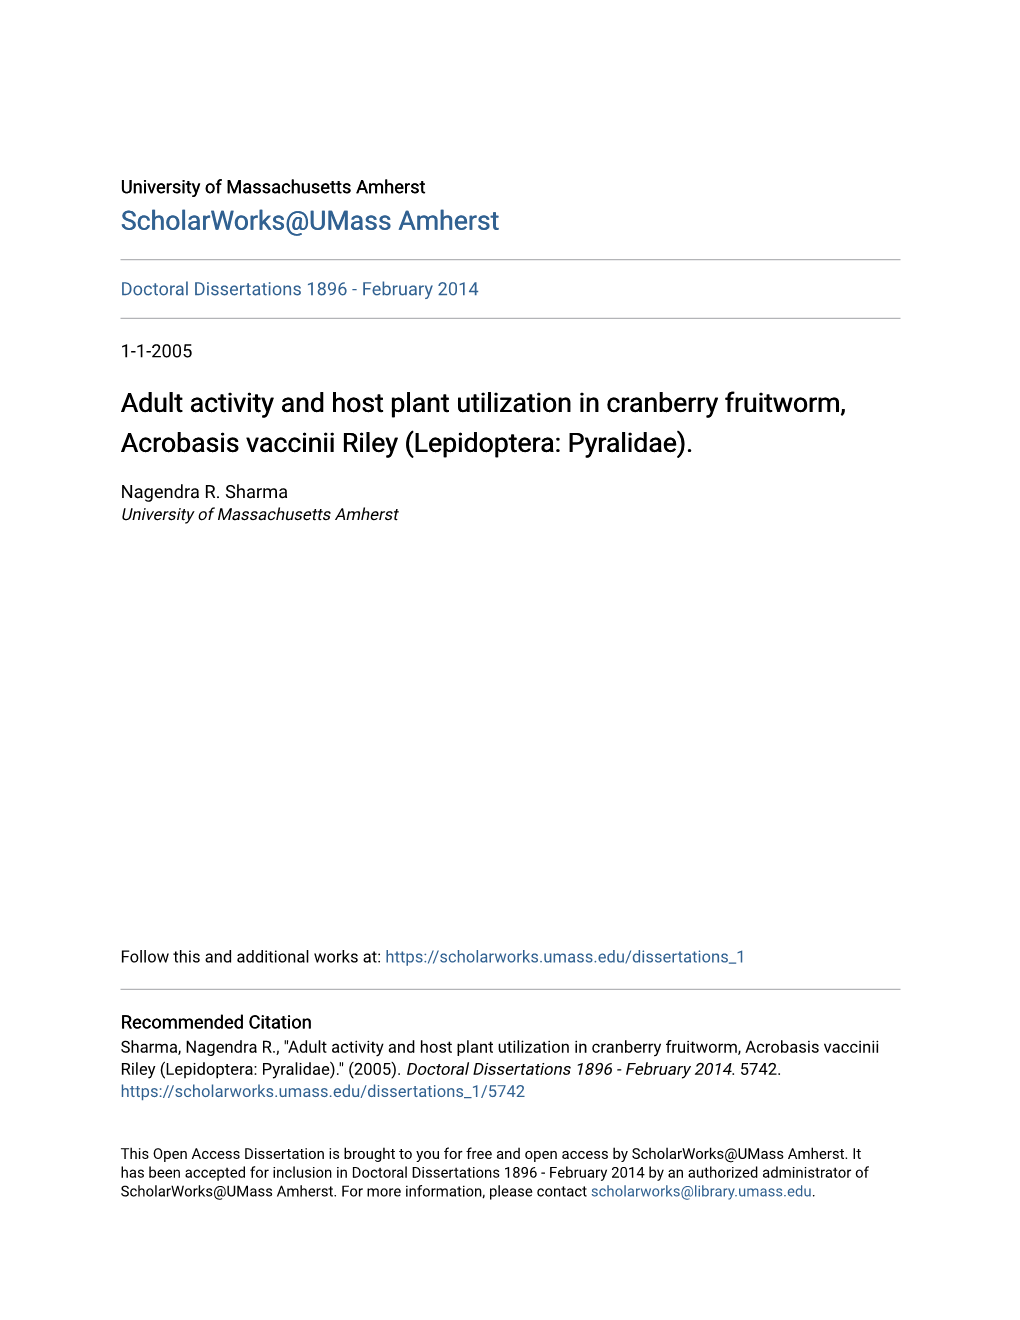 Adult Activity and Host Plant Utilization in Cranberry Fruitworm, Acrobasis Vaccinii Riley (Lepidoptera: Pyralidae)